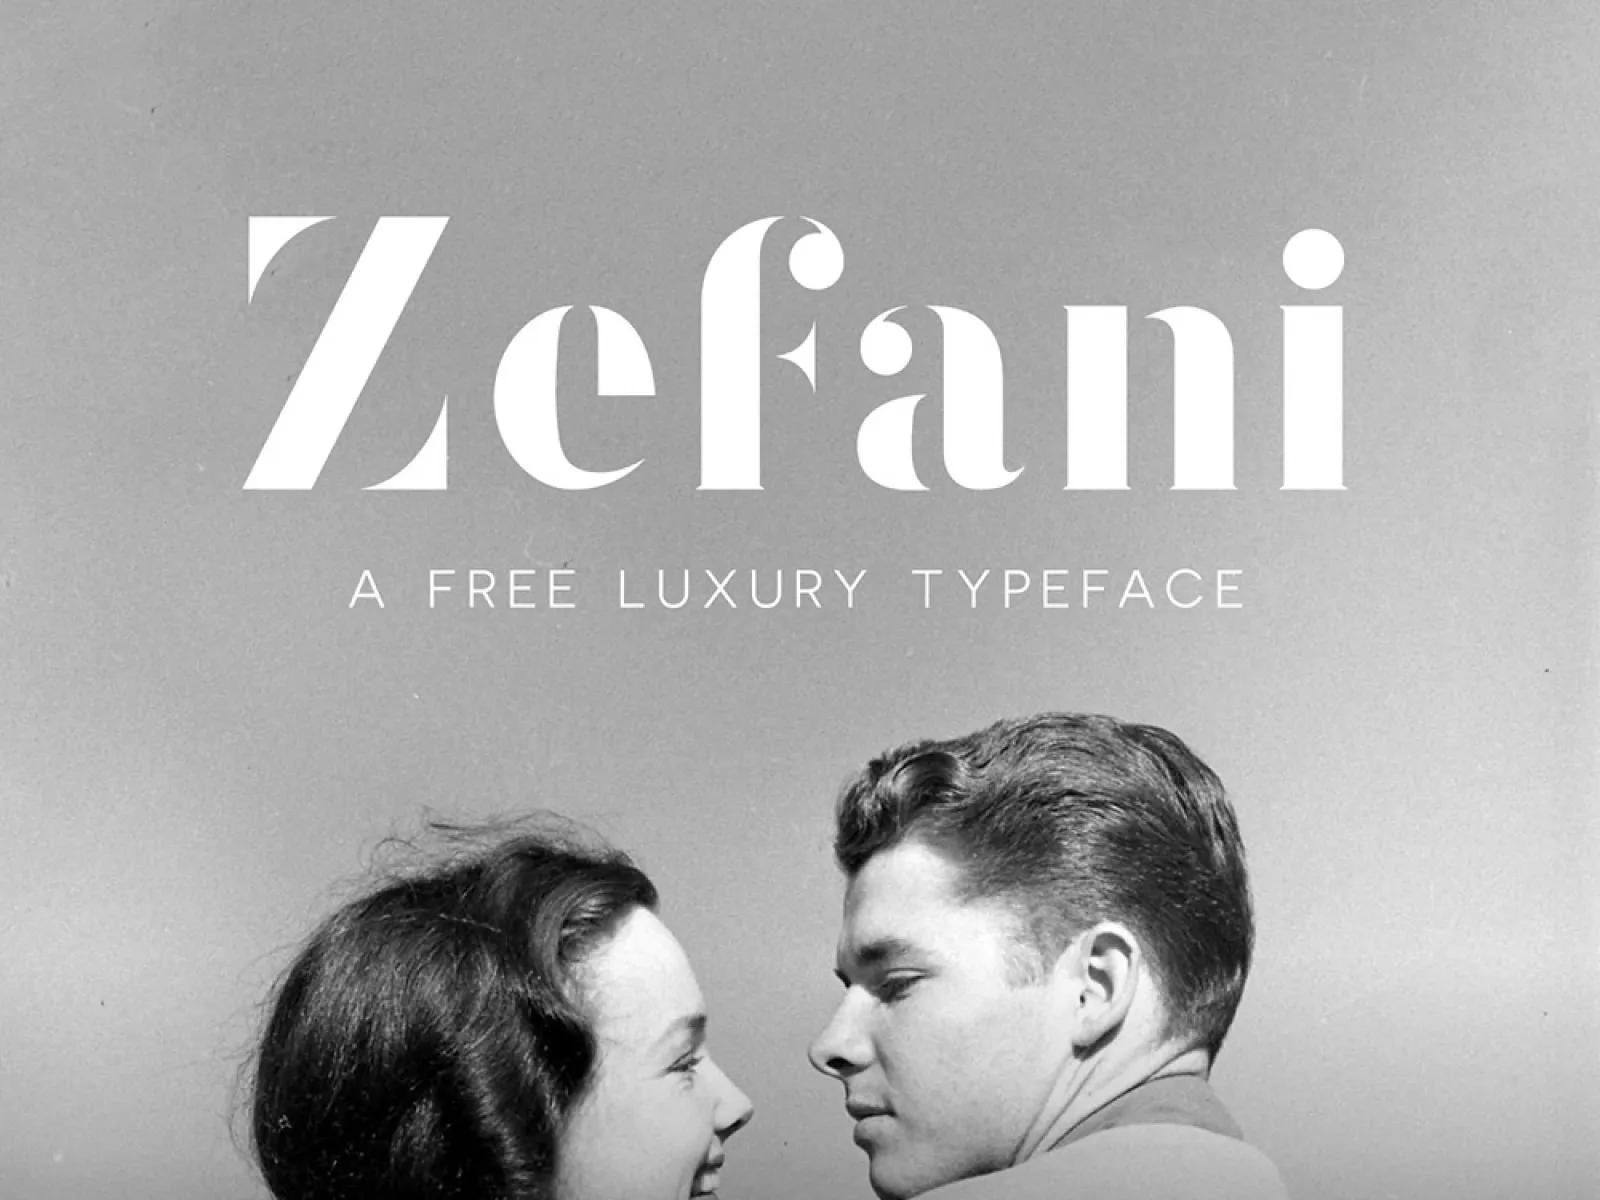 Zefani Free Type Family for Figma and Adobe XD